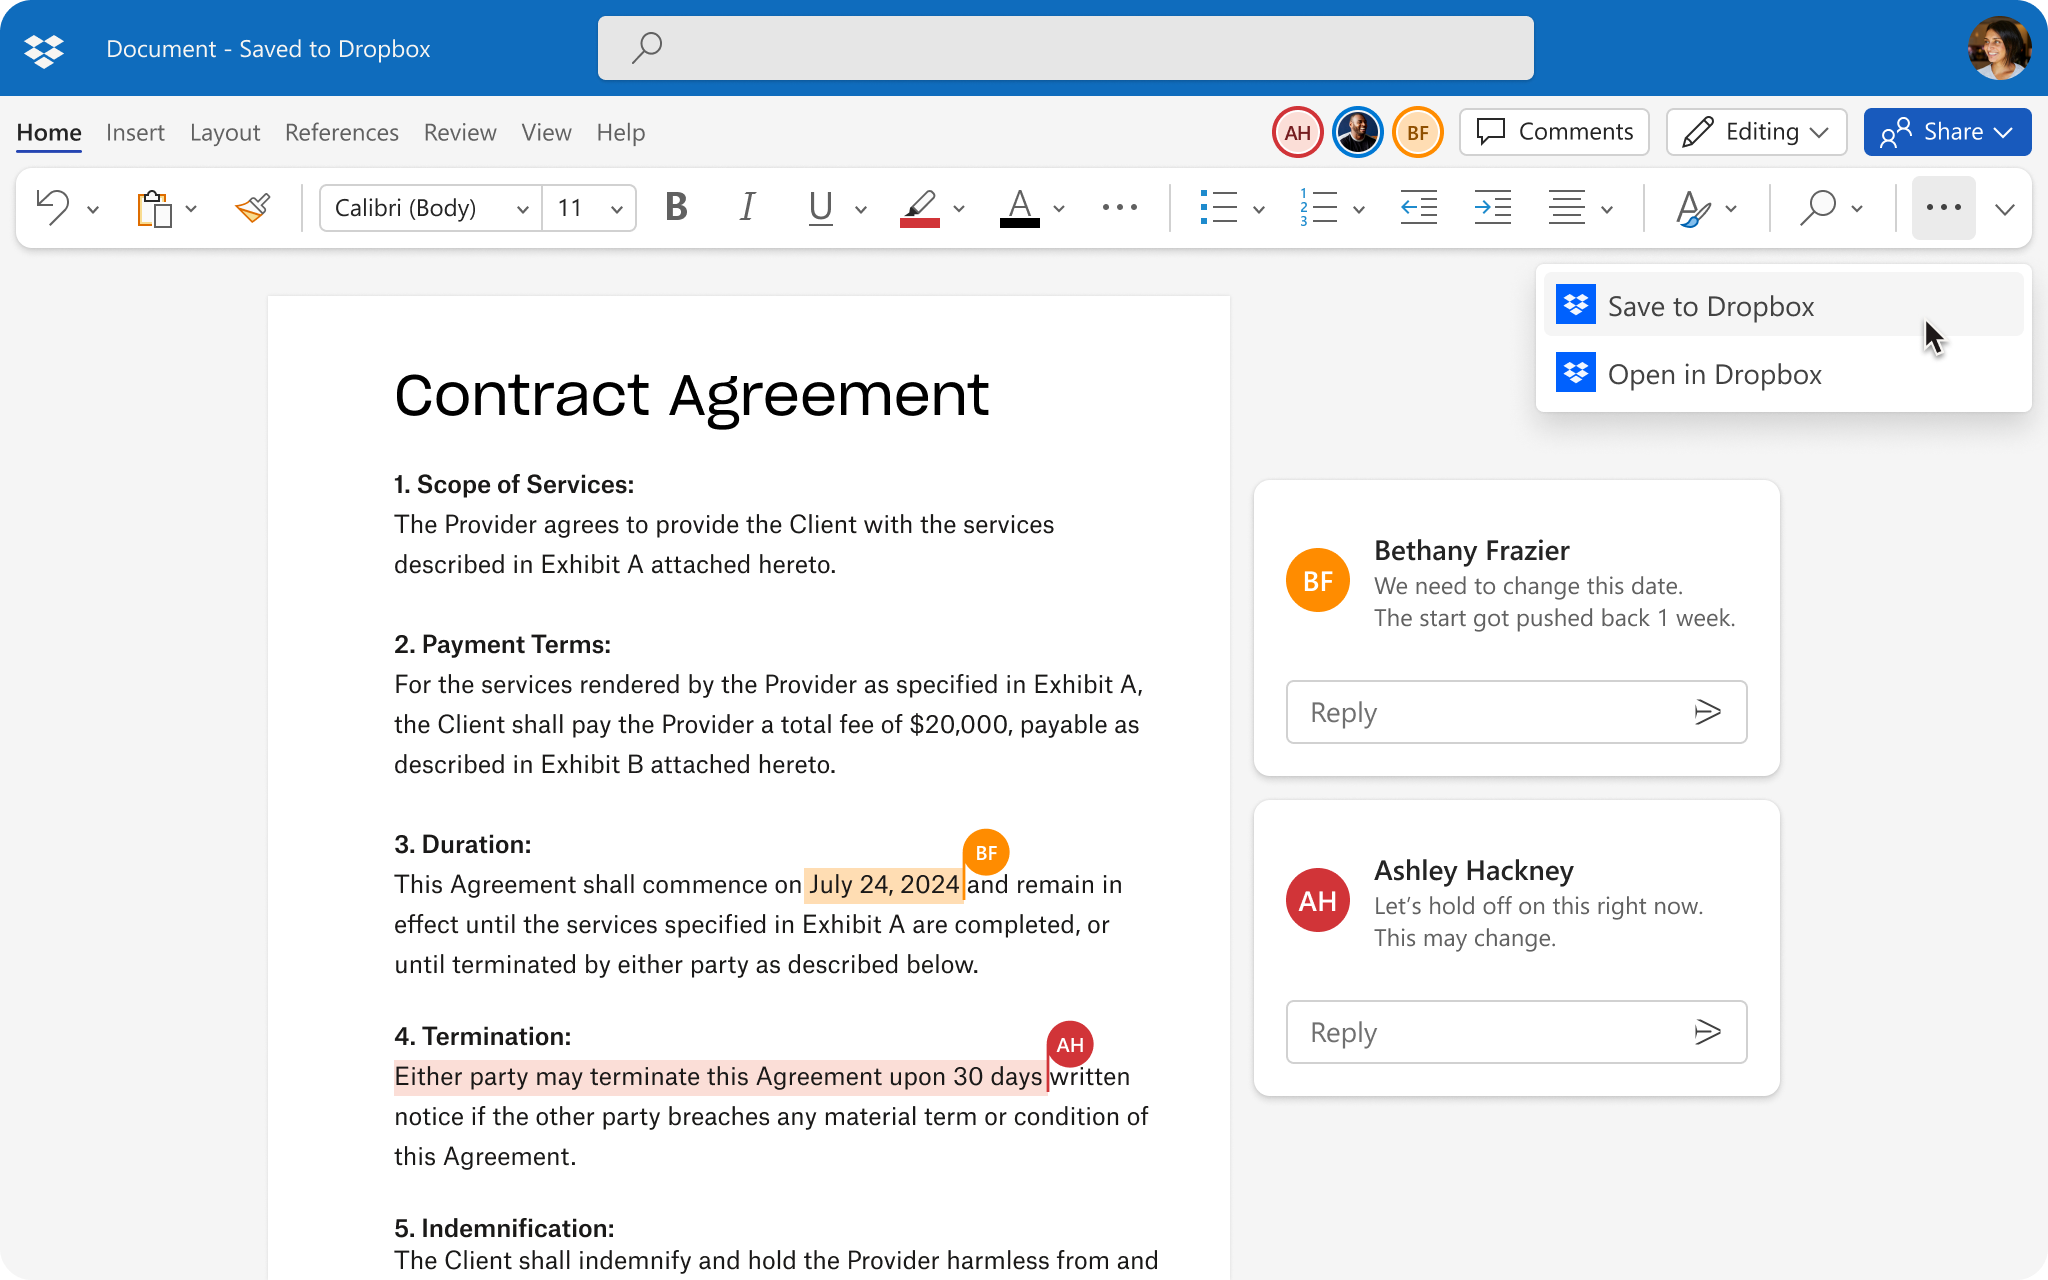 UI of document being edited by multiple people, with option to save changes to Dropbox